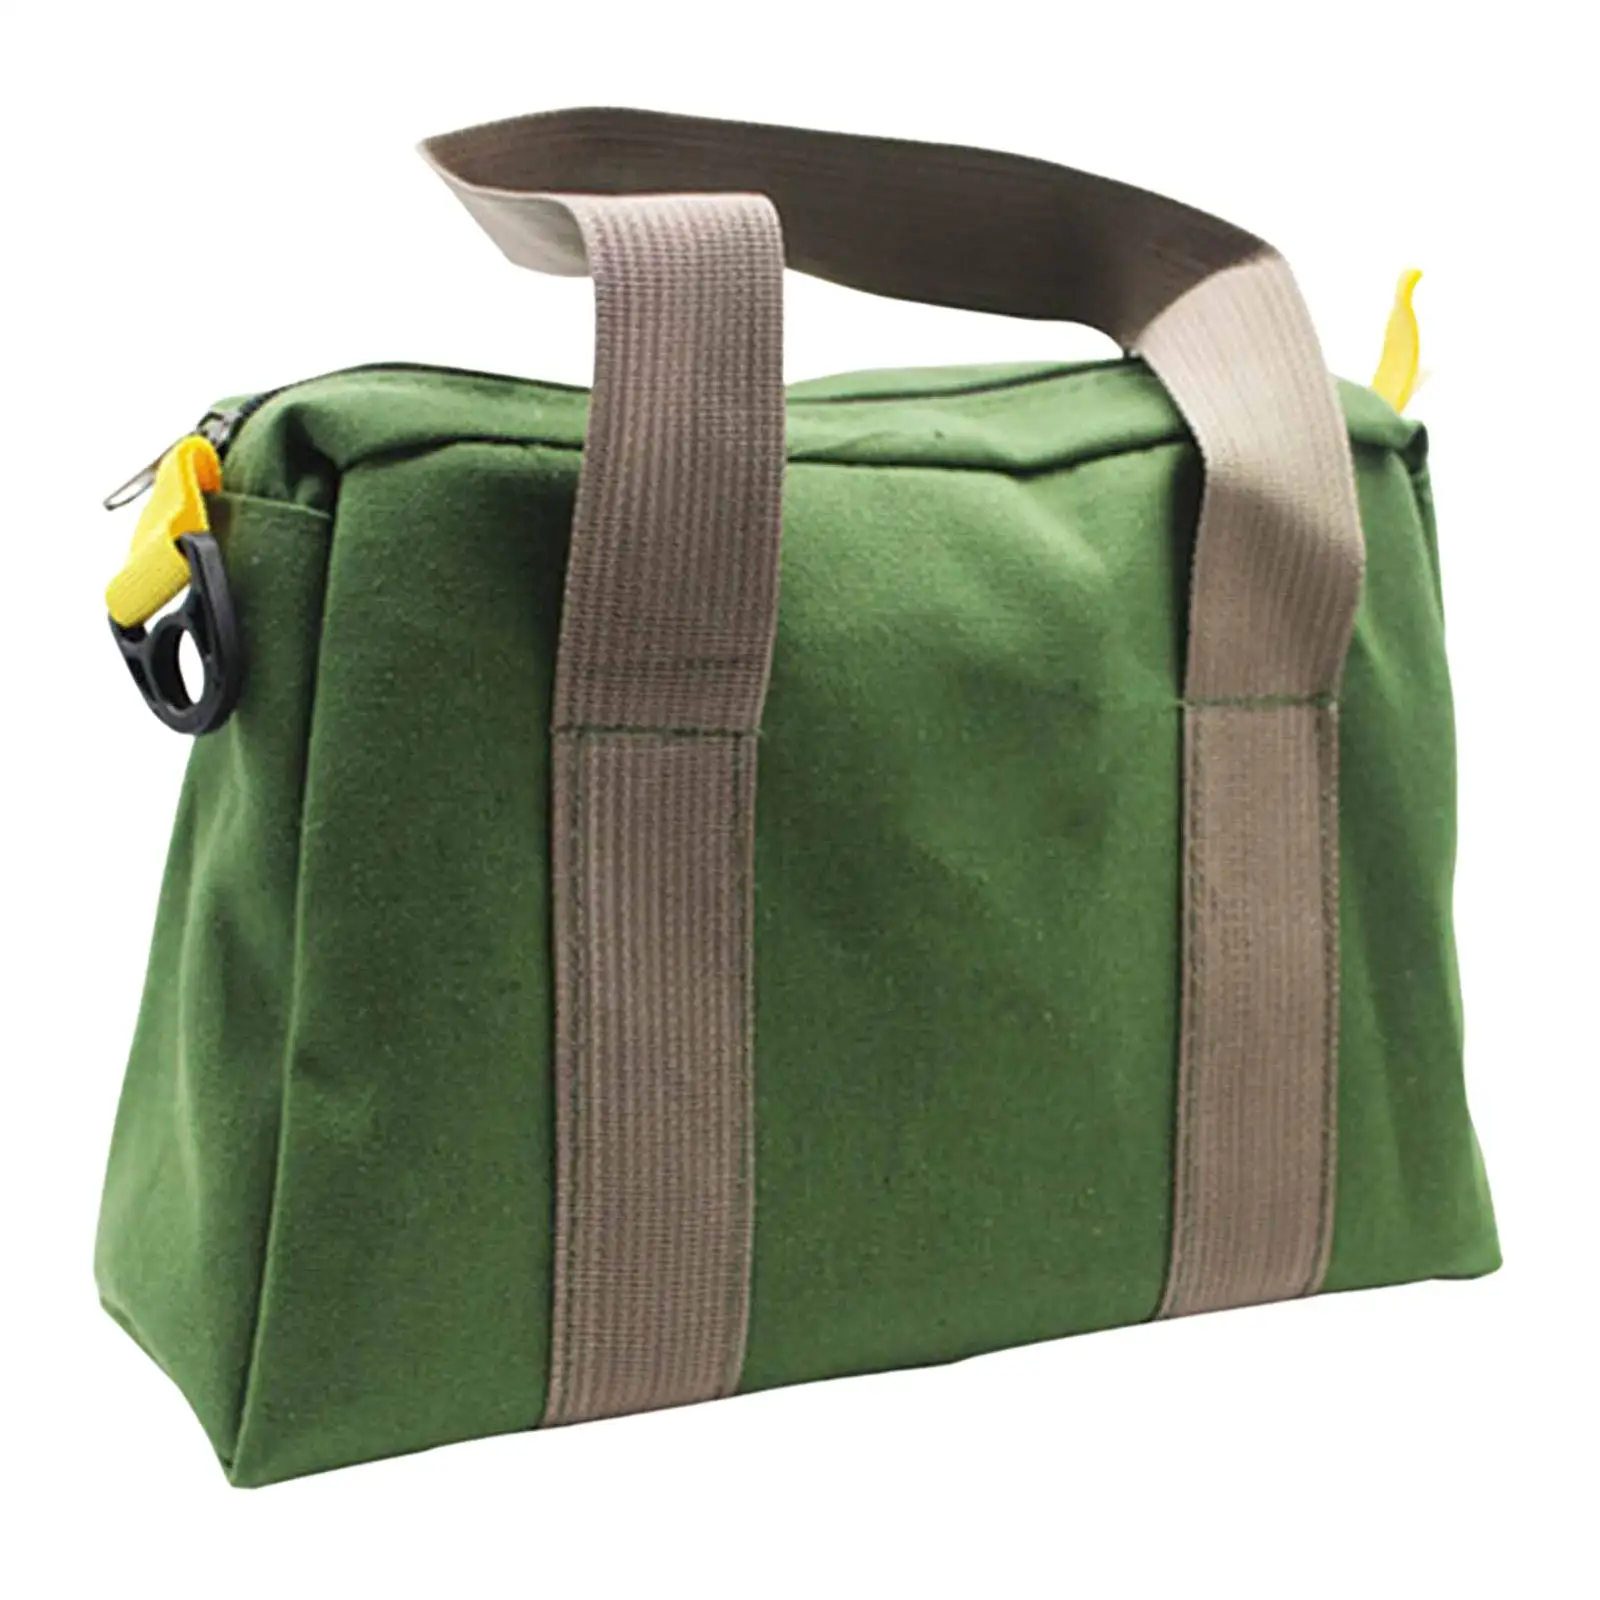 Waterproof Canvas Tool Storage Handbag Portable Sturdy Durable Toolkit for Men, Gardener, Carpenters, Electricians Tool Pouch